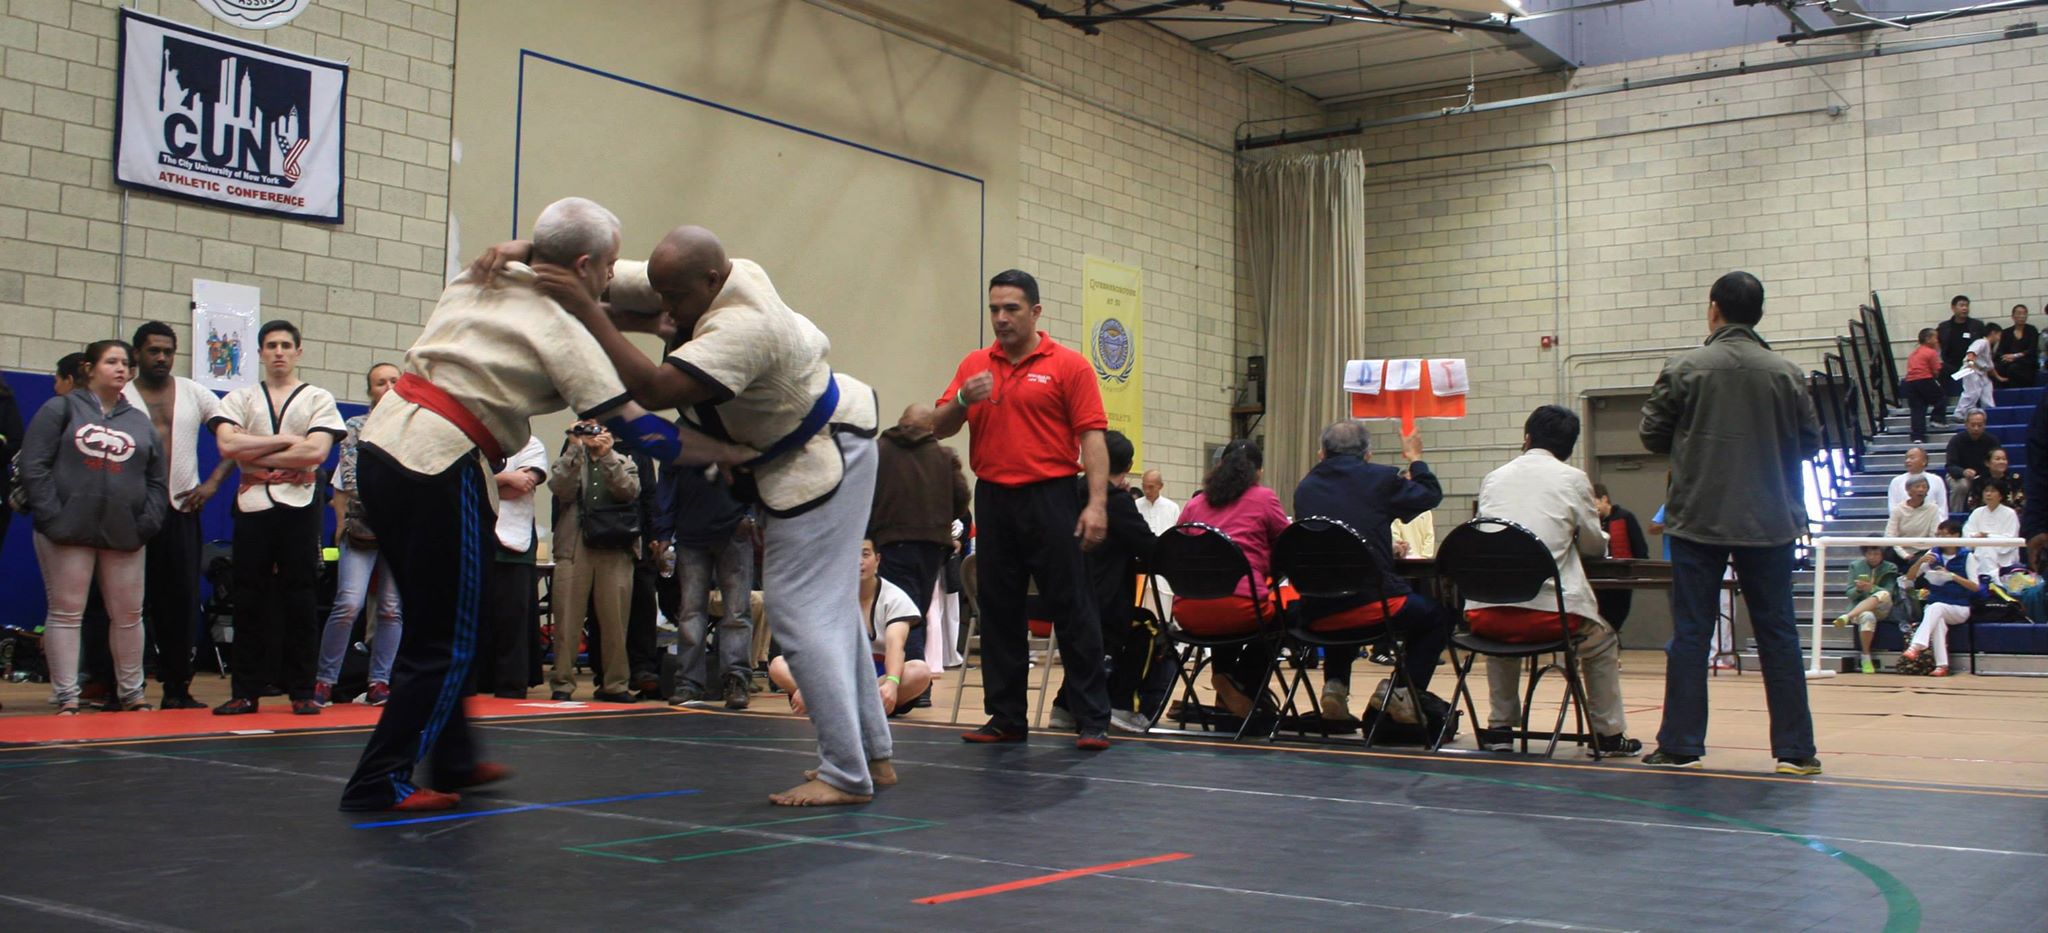 Shuai Jiao competition at US Open Martial Arts Championship organized by the WFMAF